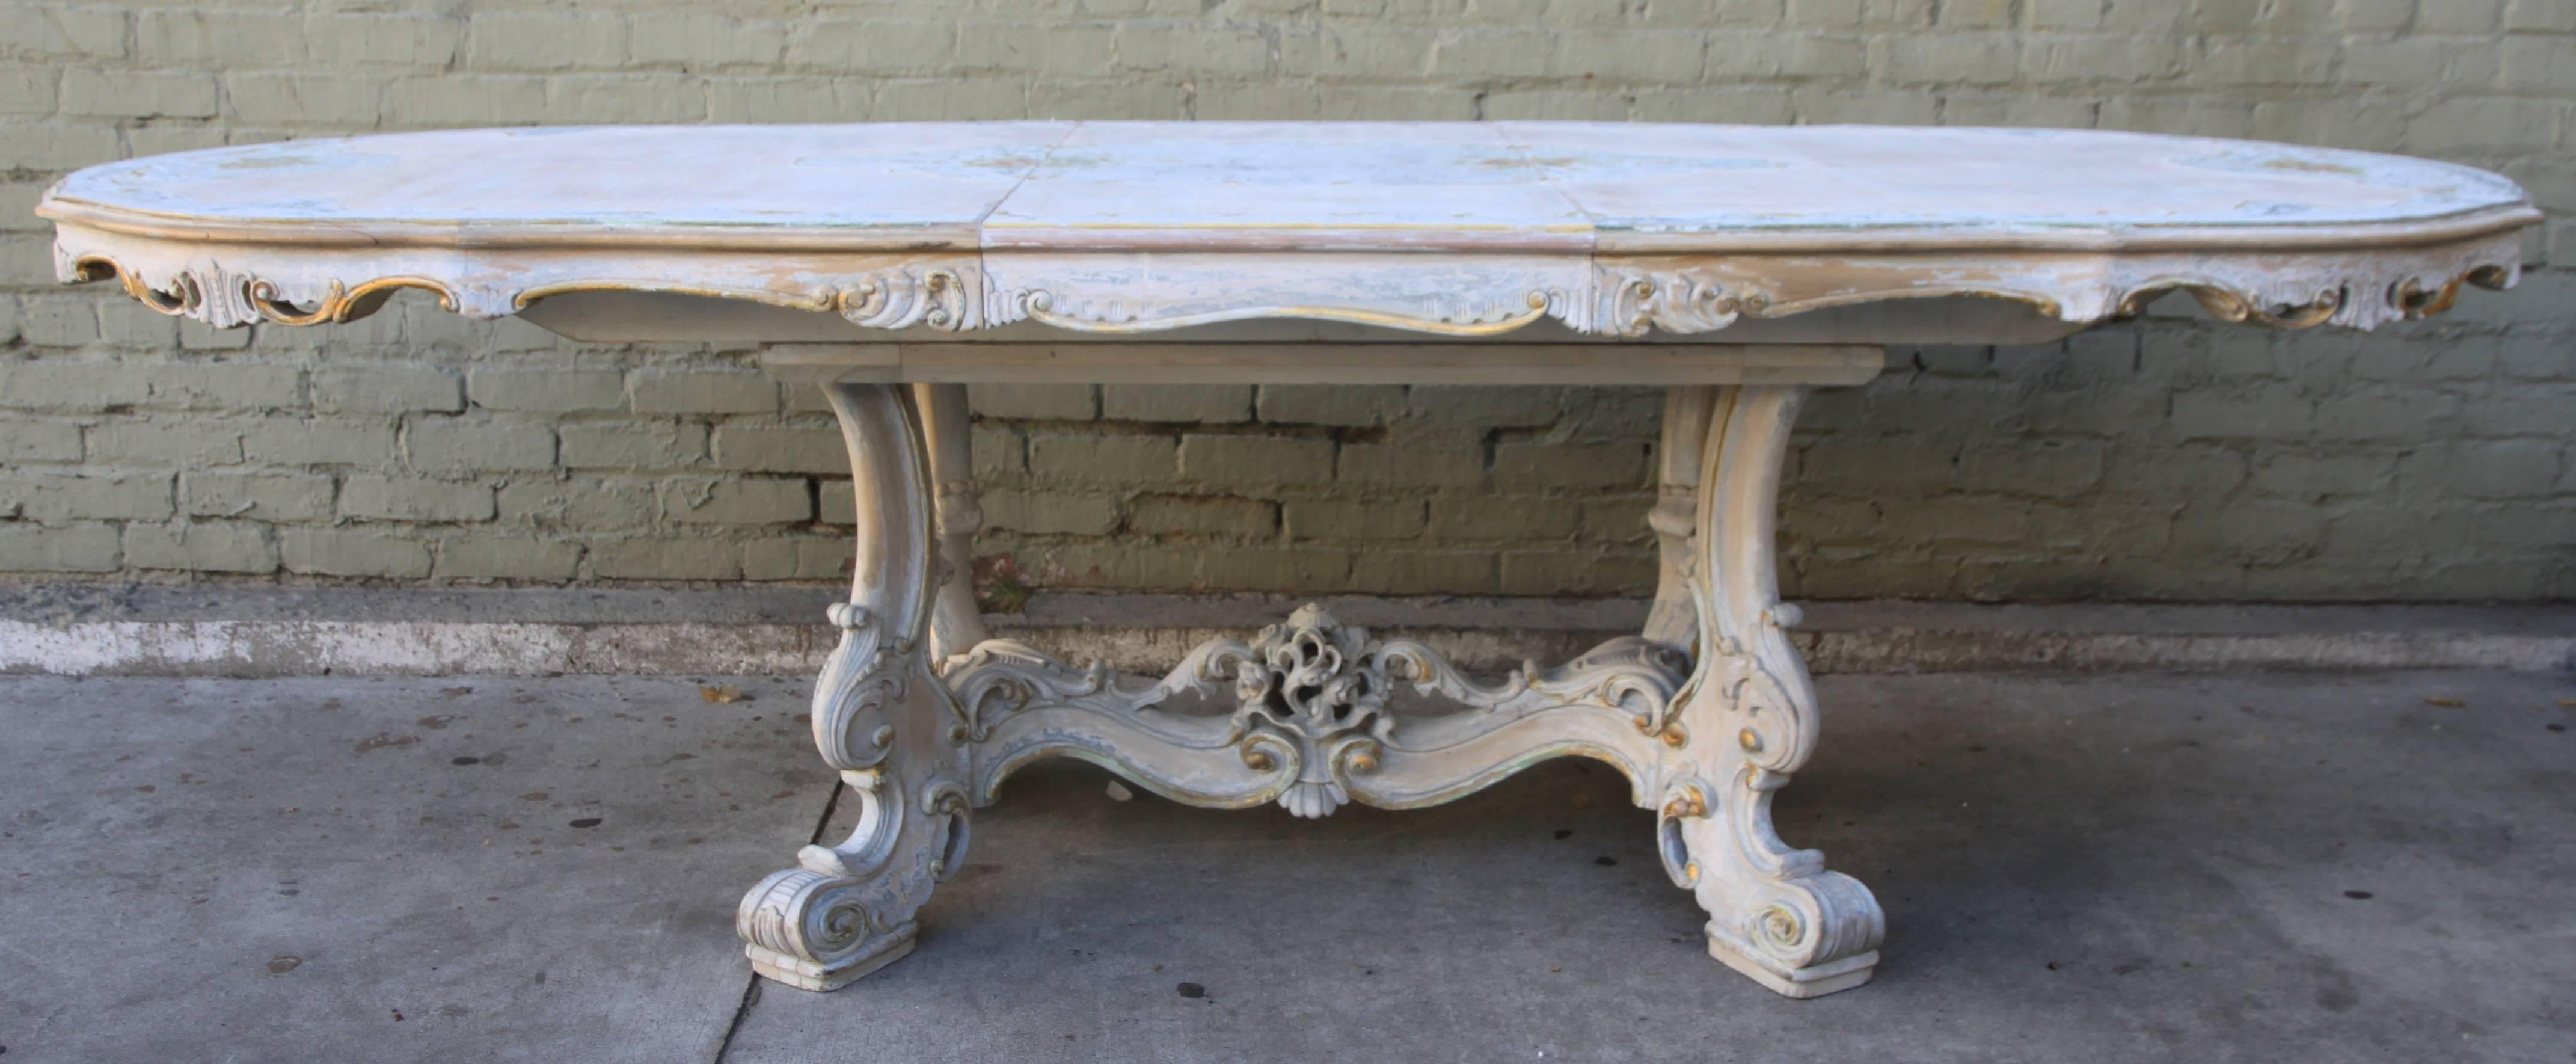 French 1930's painted Rococo style dining table with center leaf.